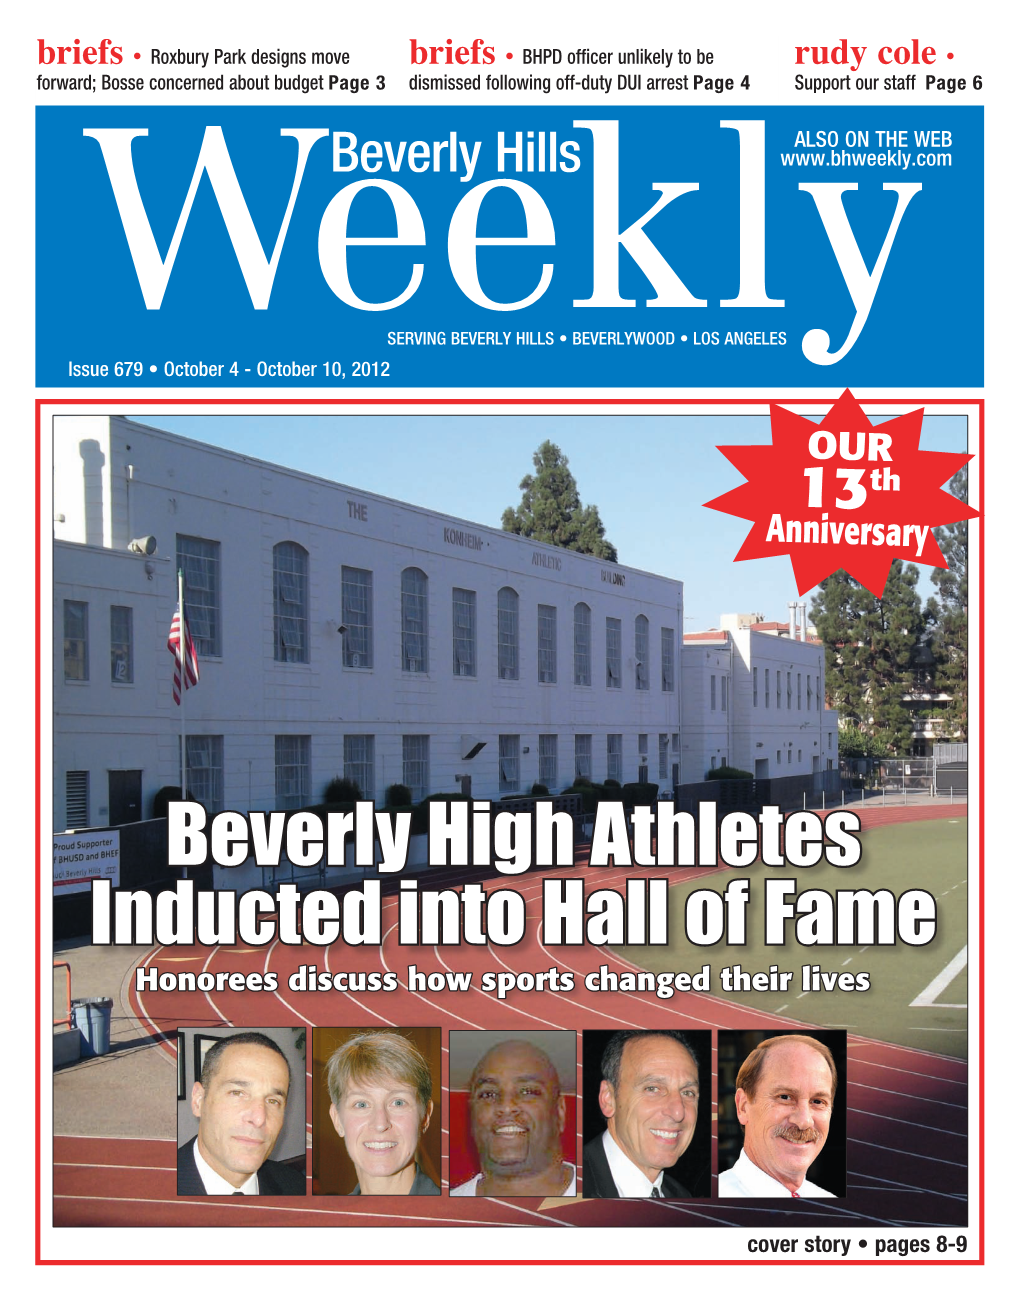 Beverly High Athletes Inducted Into Hall of Fame Honorees Discuss How Sports Changed Their Lives